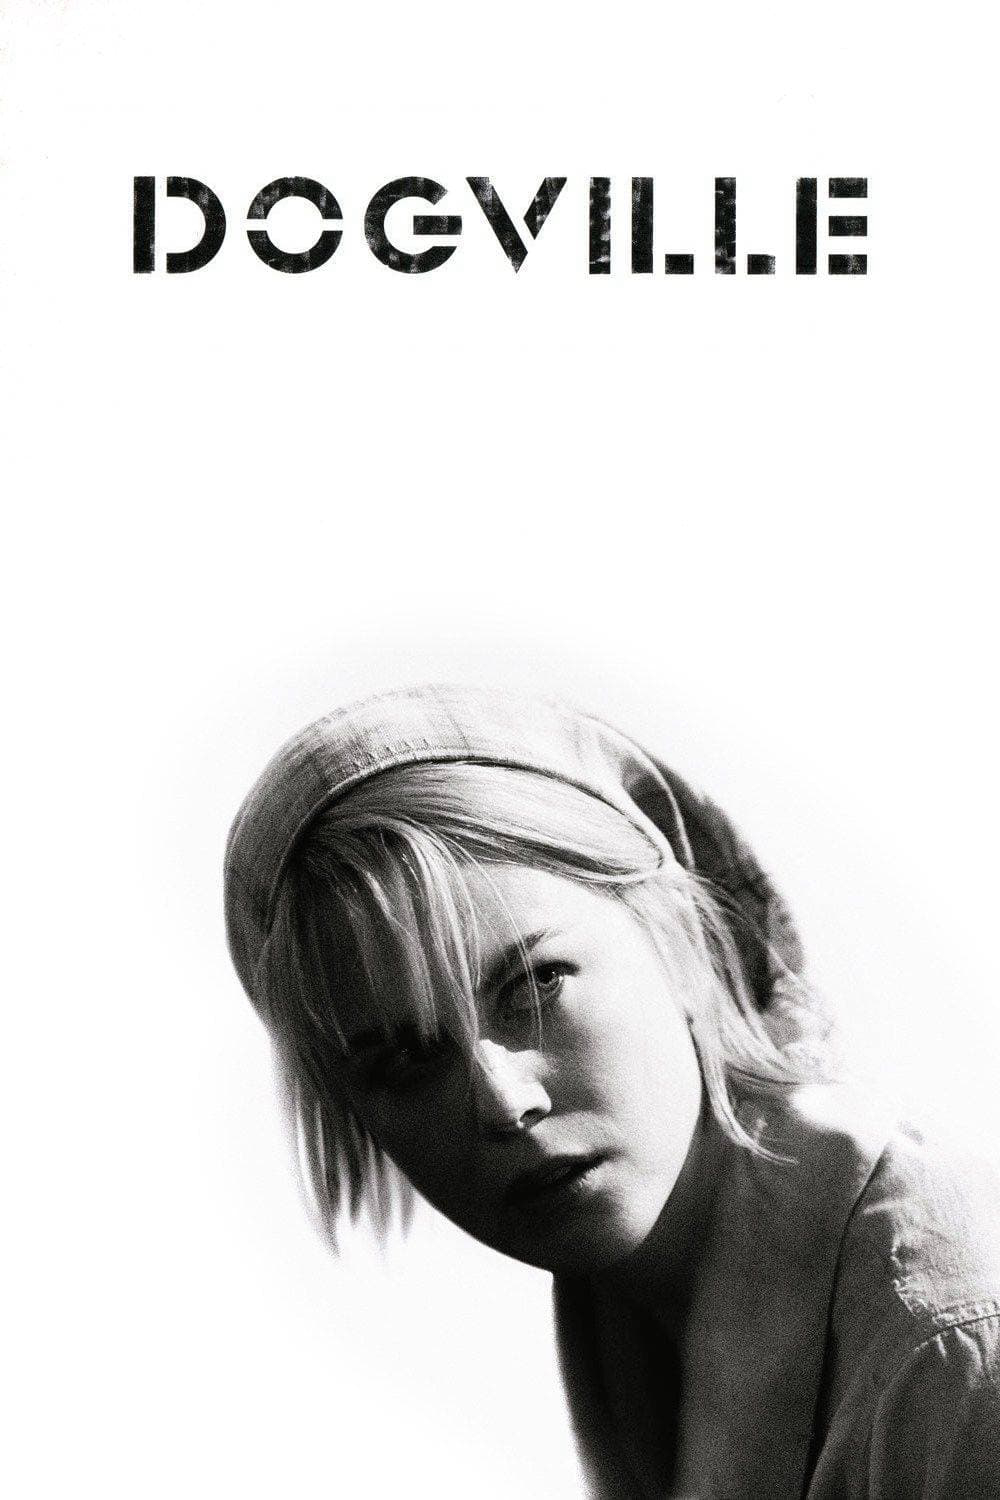 Poster Phim Thị trấn Dogville (Dogville)